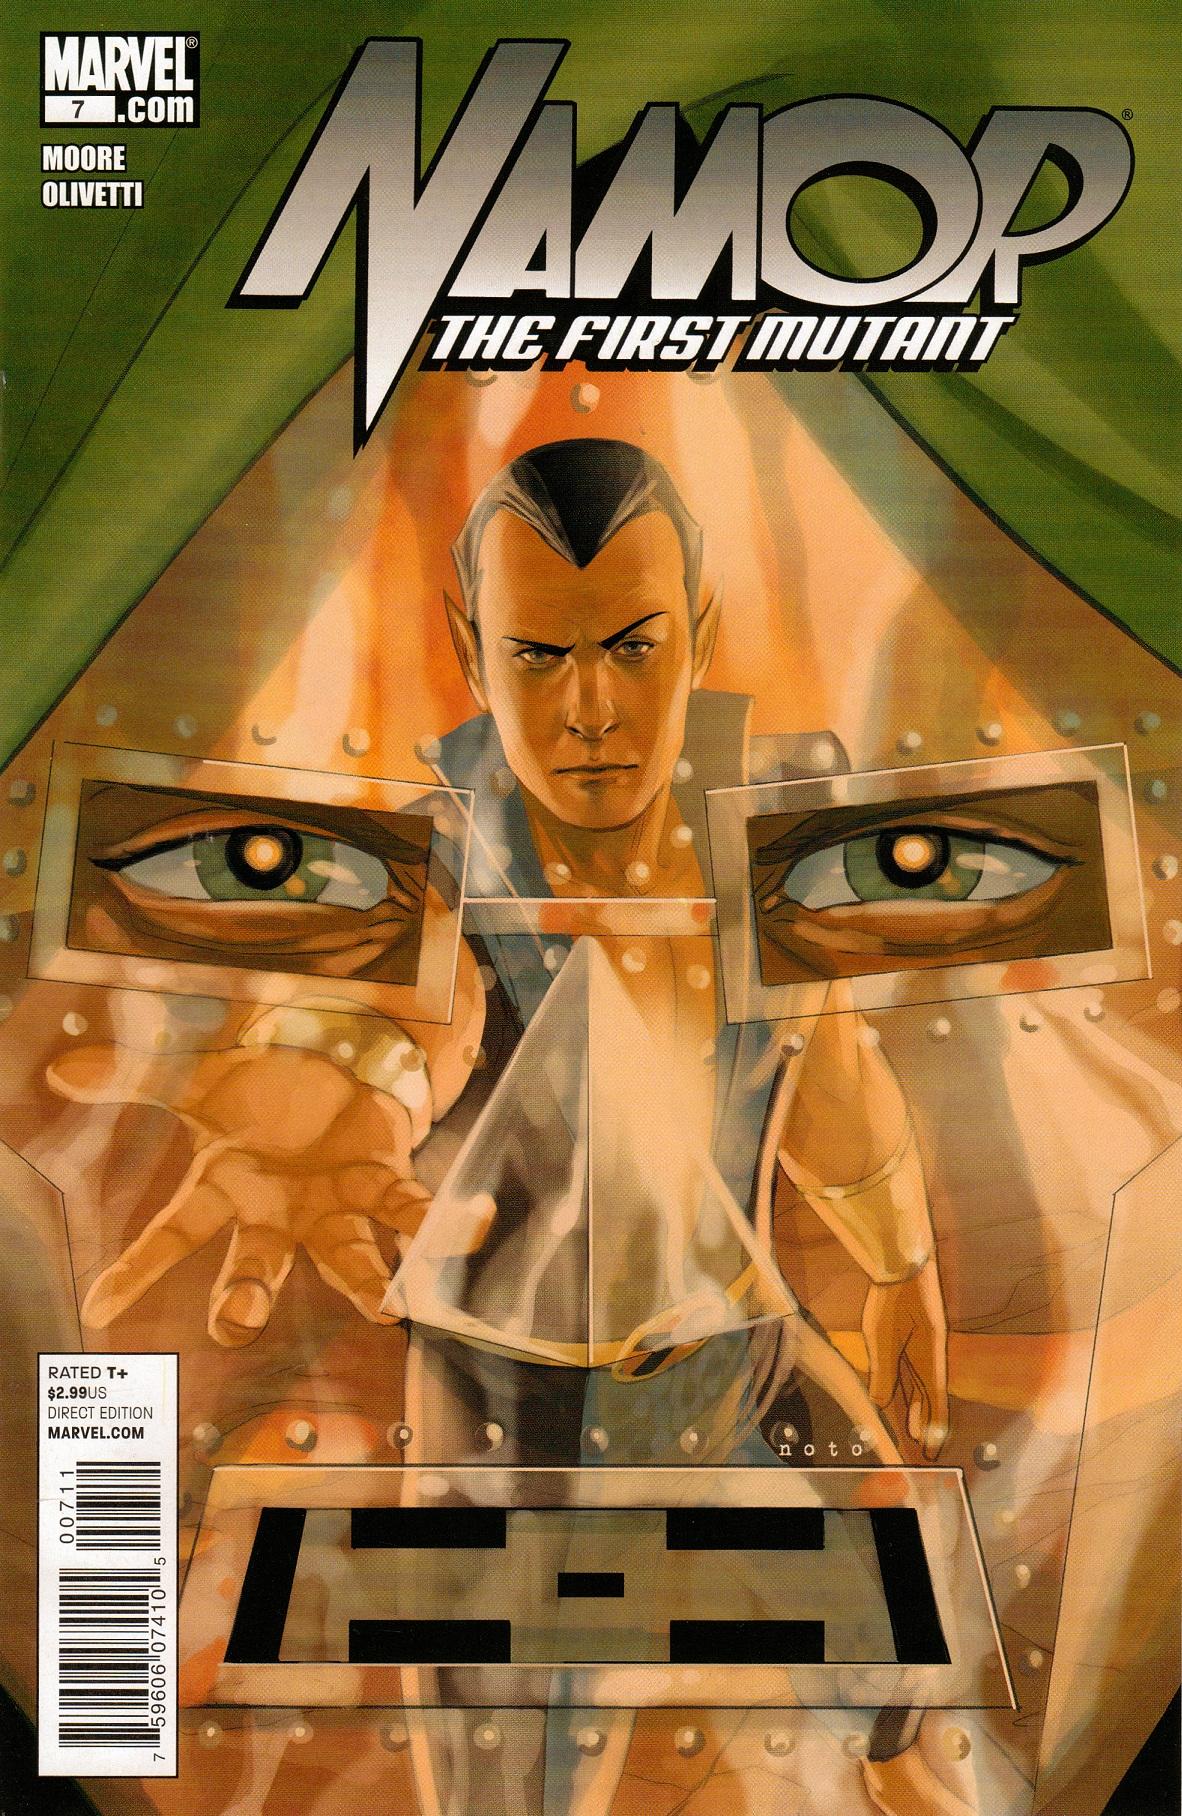 Namor: The First Mutant Vol. 1 #7